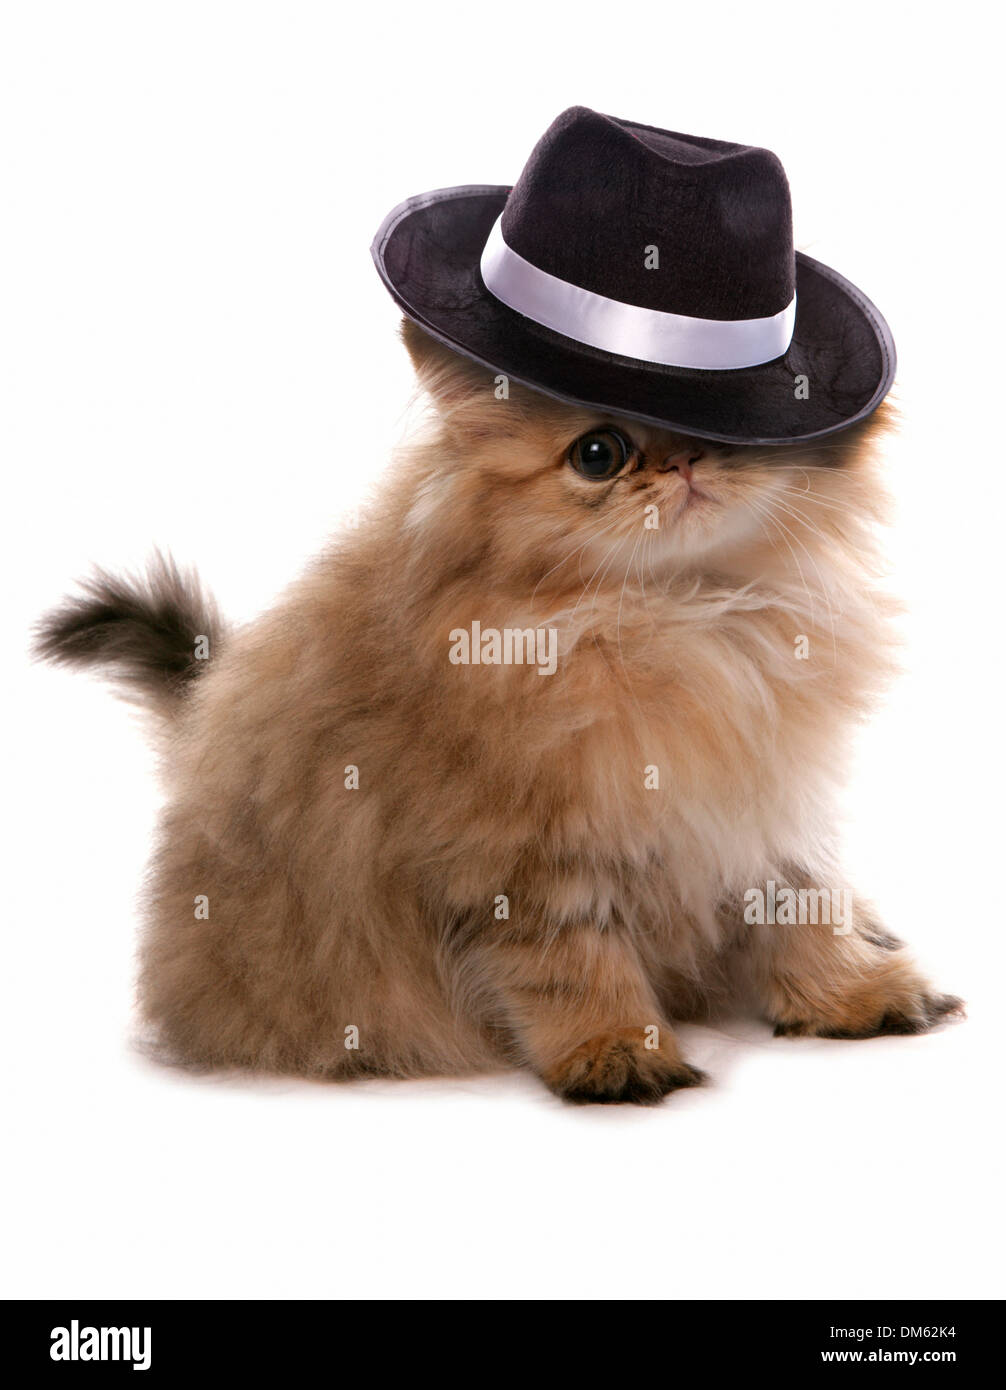 Persian cat. Golden kitten sitting with mafia hat. Studio picture against a white background Stock Photo